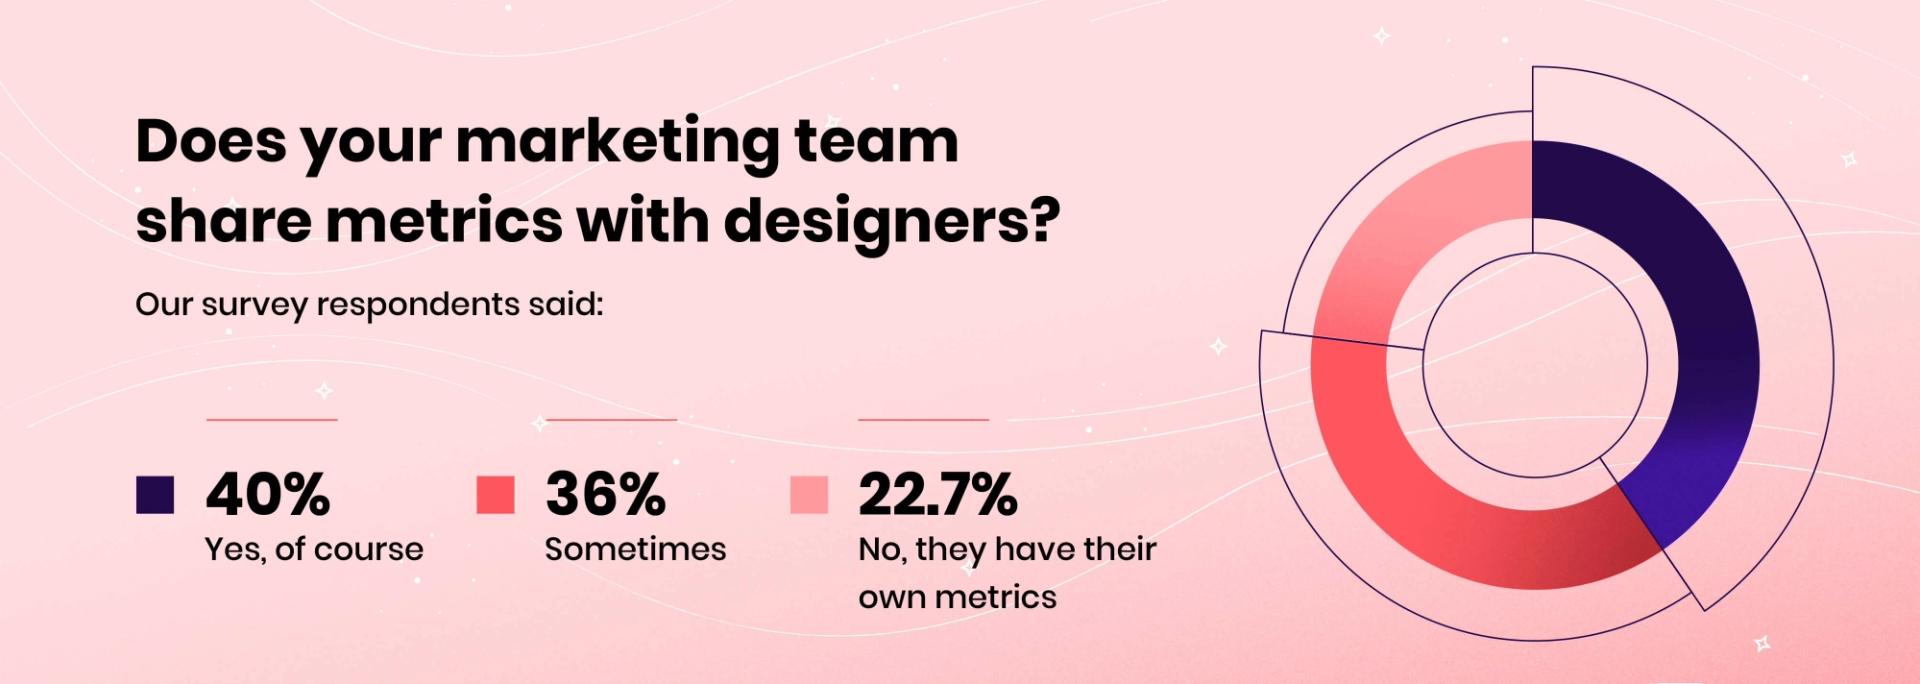 Does your marketing team share metrics with designers?